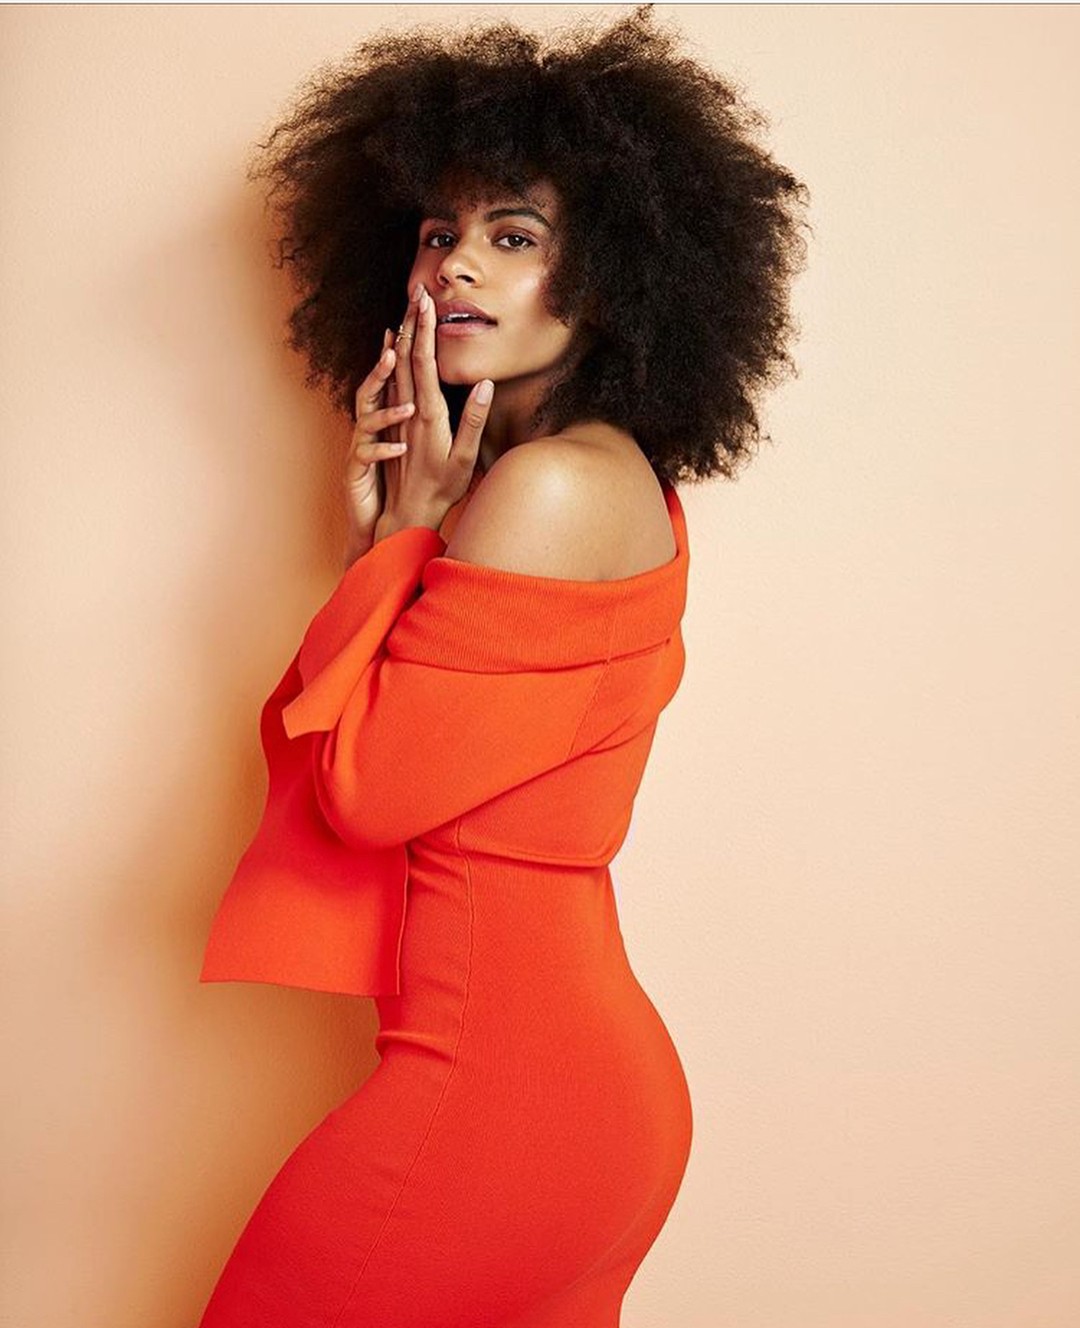 60+ Sexy Zazie Beetz Boobs Pictures Are Absolutely Mouth-Watering 187